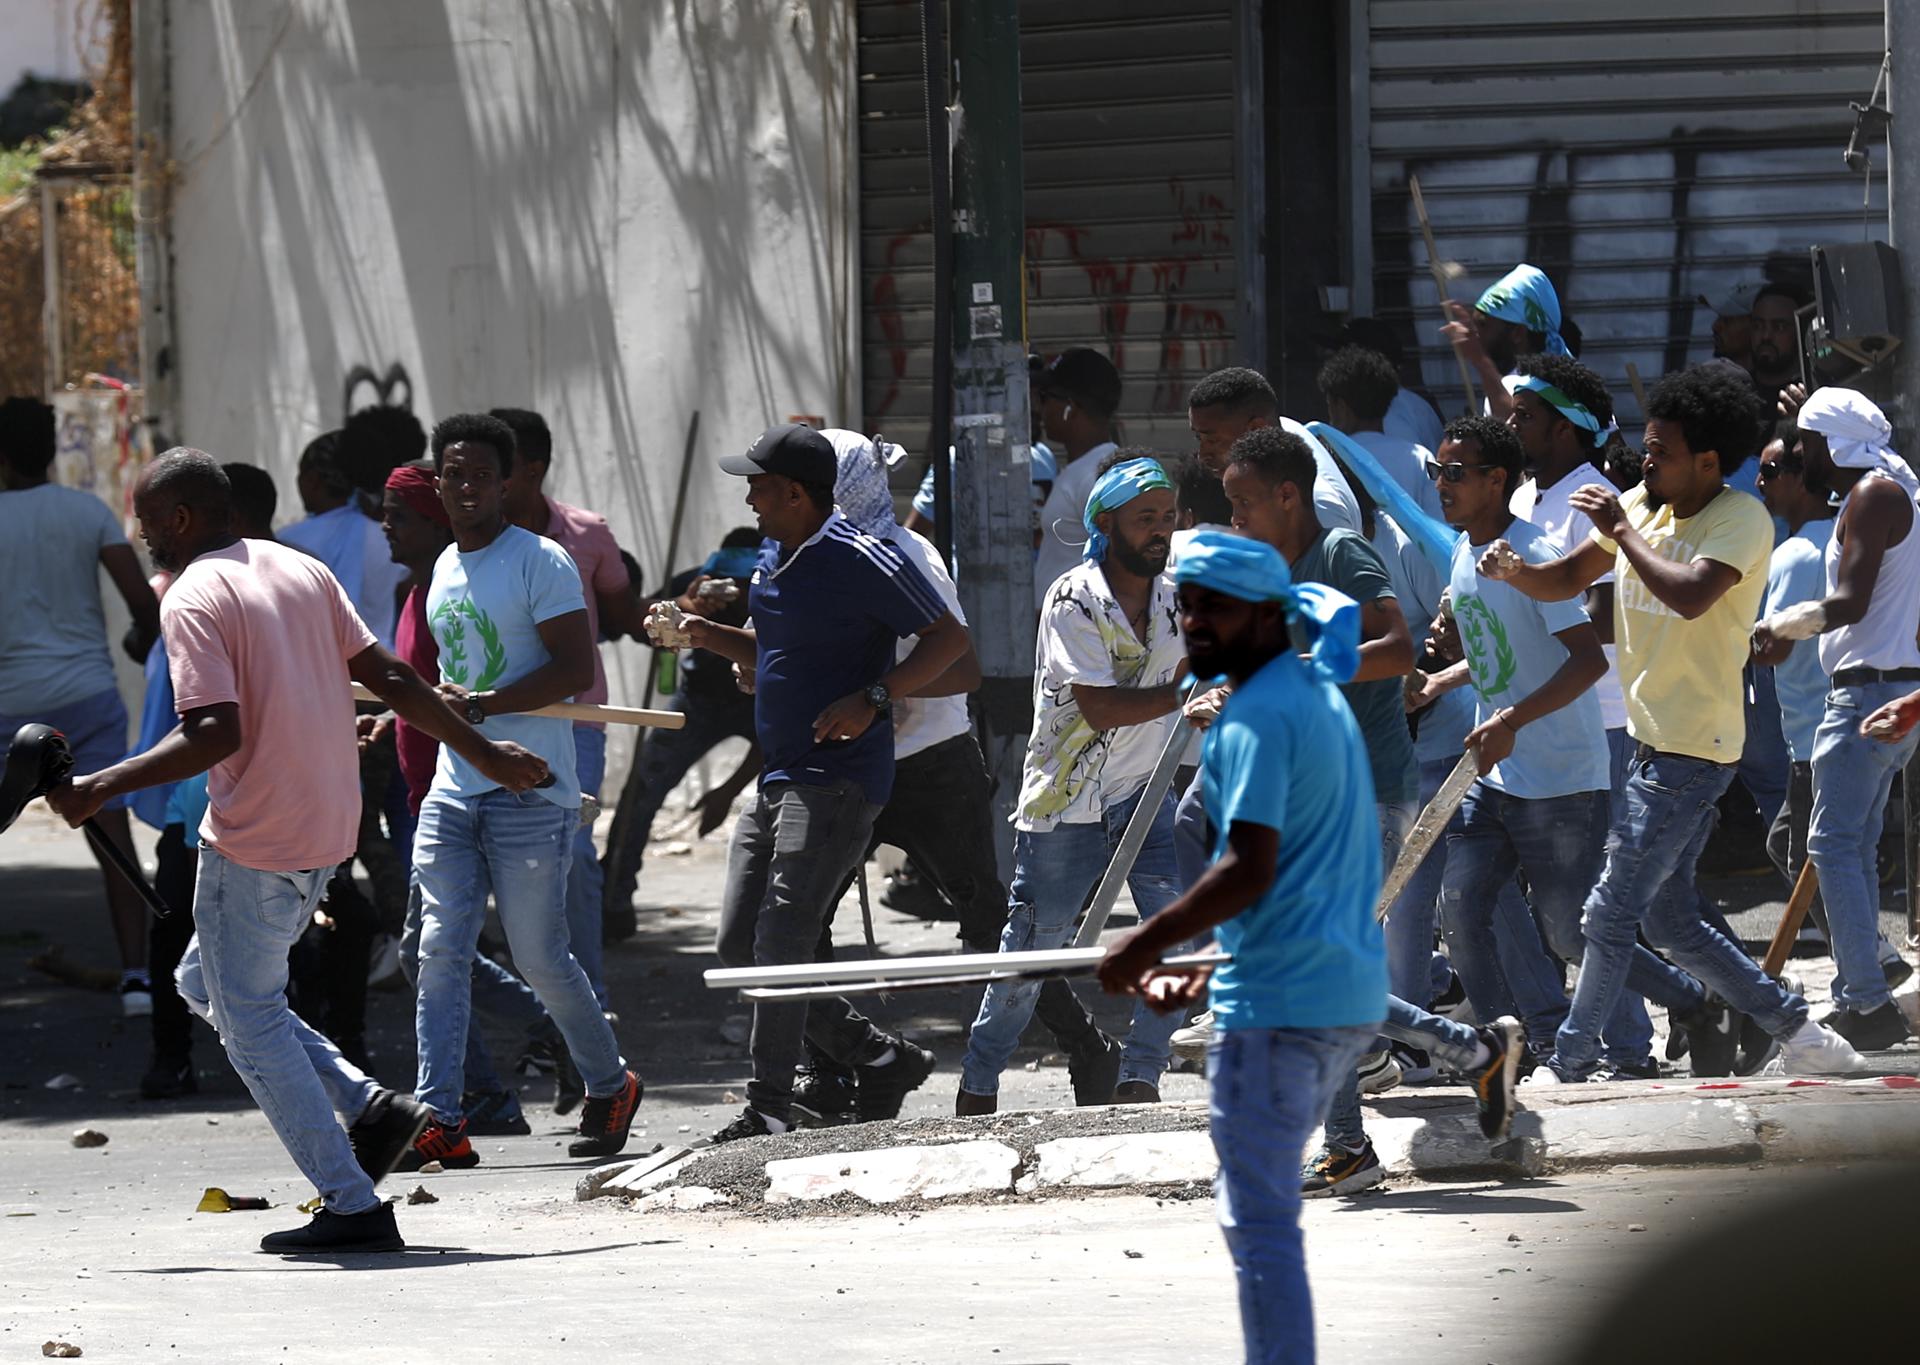 Opponents of the Eritrean regime move in a street during a protest against a pro-regime conference followed by clashes with Israeli police, in Tel Aviv, Israel, 02 September 2023. EFE-EPA/ATEF SAFADI
